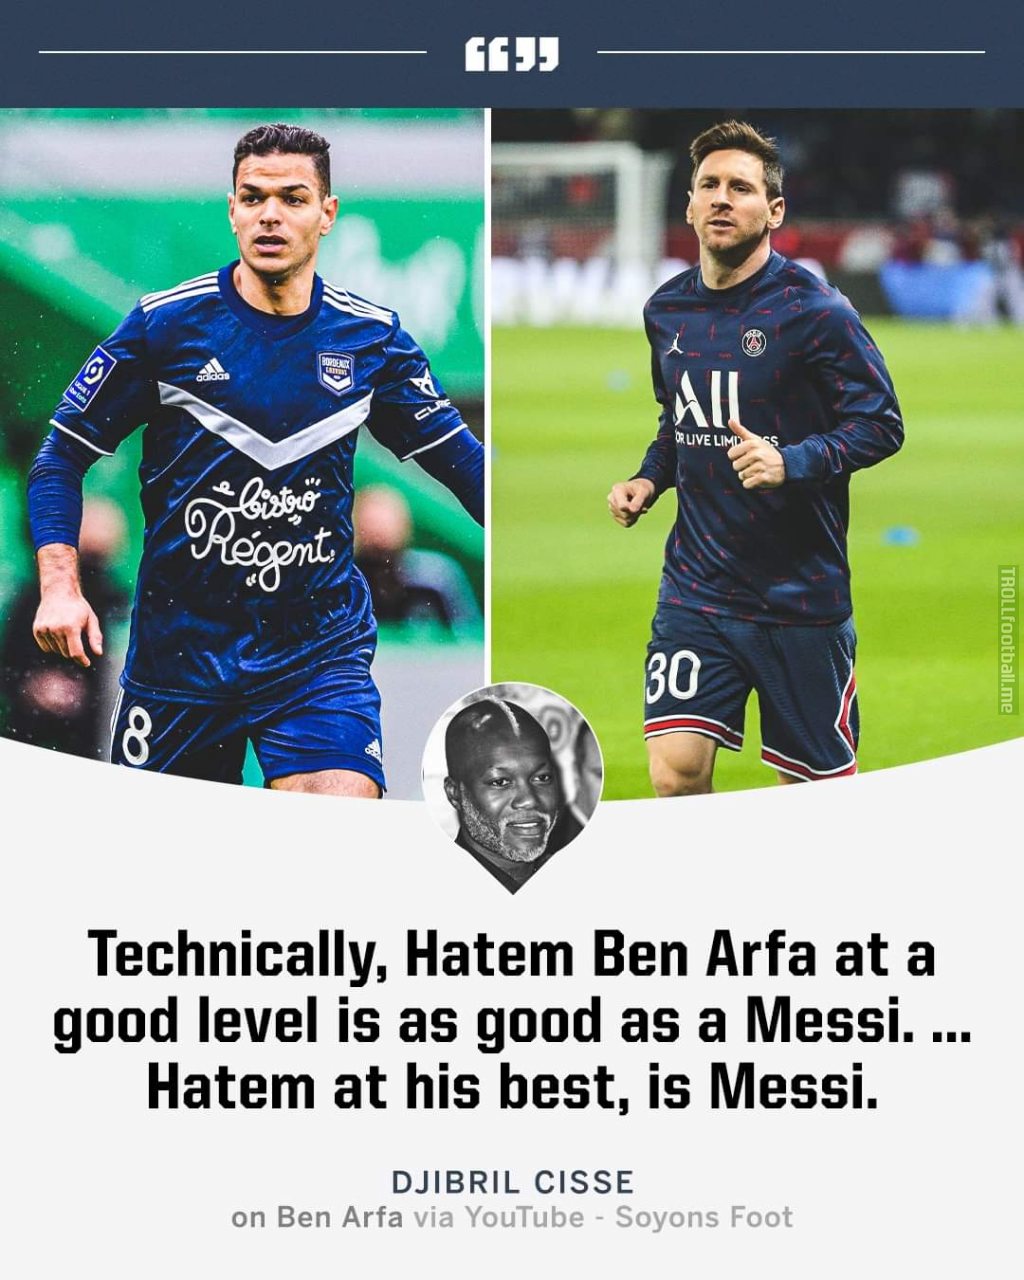 [ESPN FC]DjiBril Cisse on Ben Arfa via Youtube (Soyons Foot):-"Technically, Hatem Ben Arfa at a good level is as good as a Messi..... Hatem at his best,is Messi"